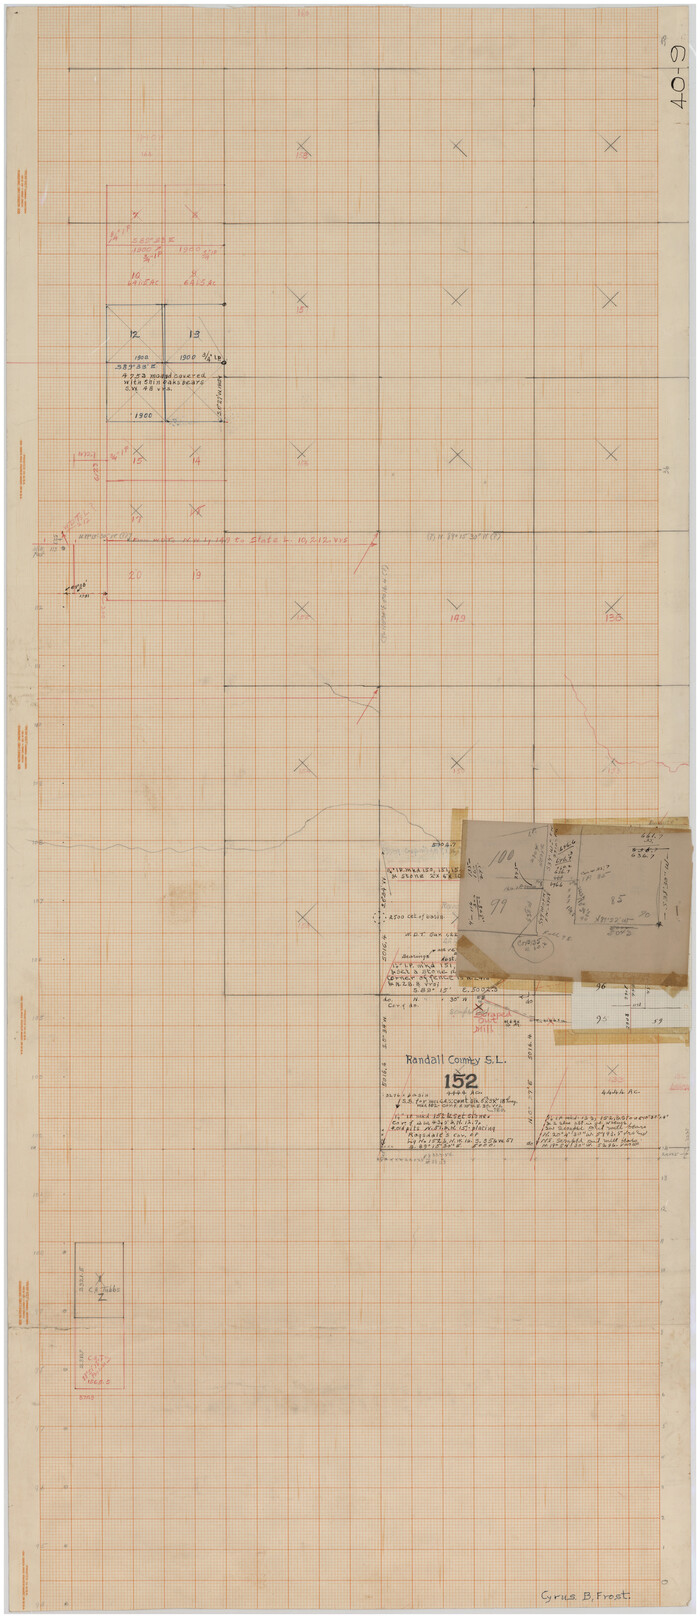 89731, [Sketch showing Randall County School Land Leagues and Vicinity], Twichell Survey Records